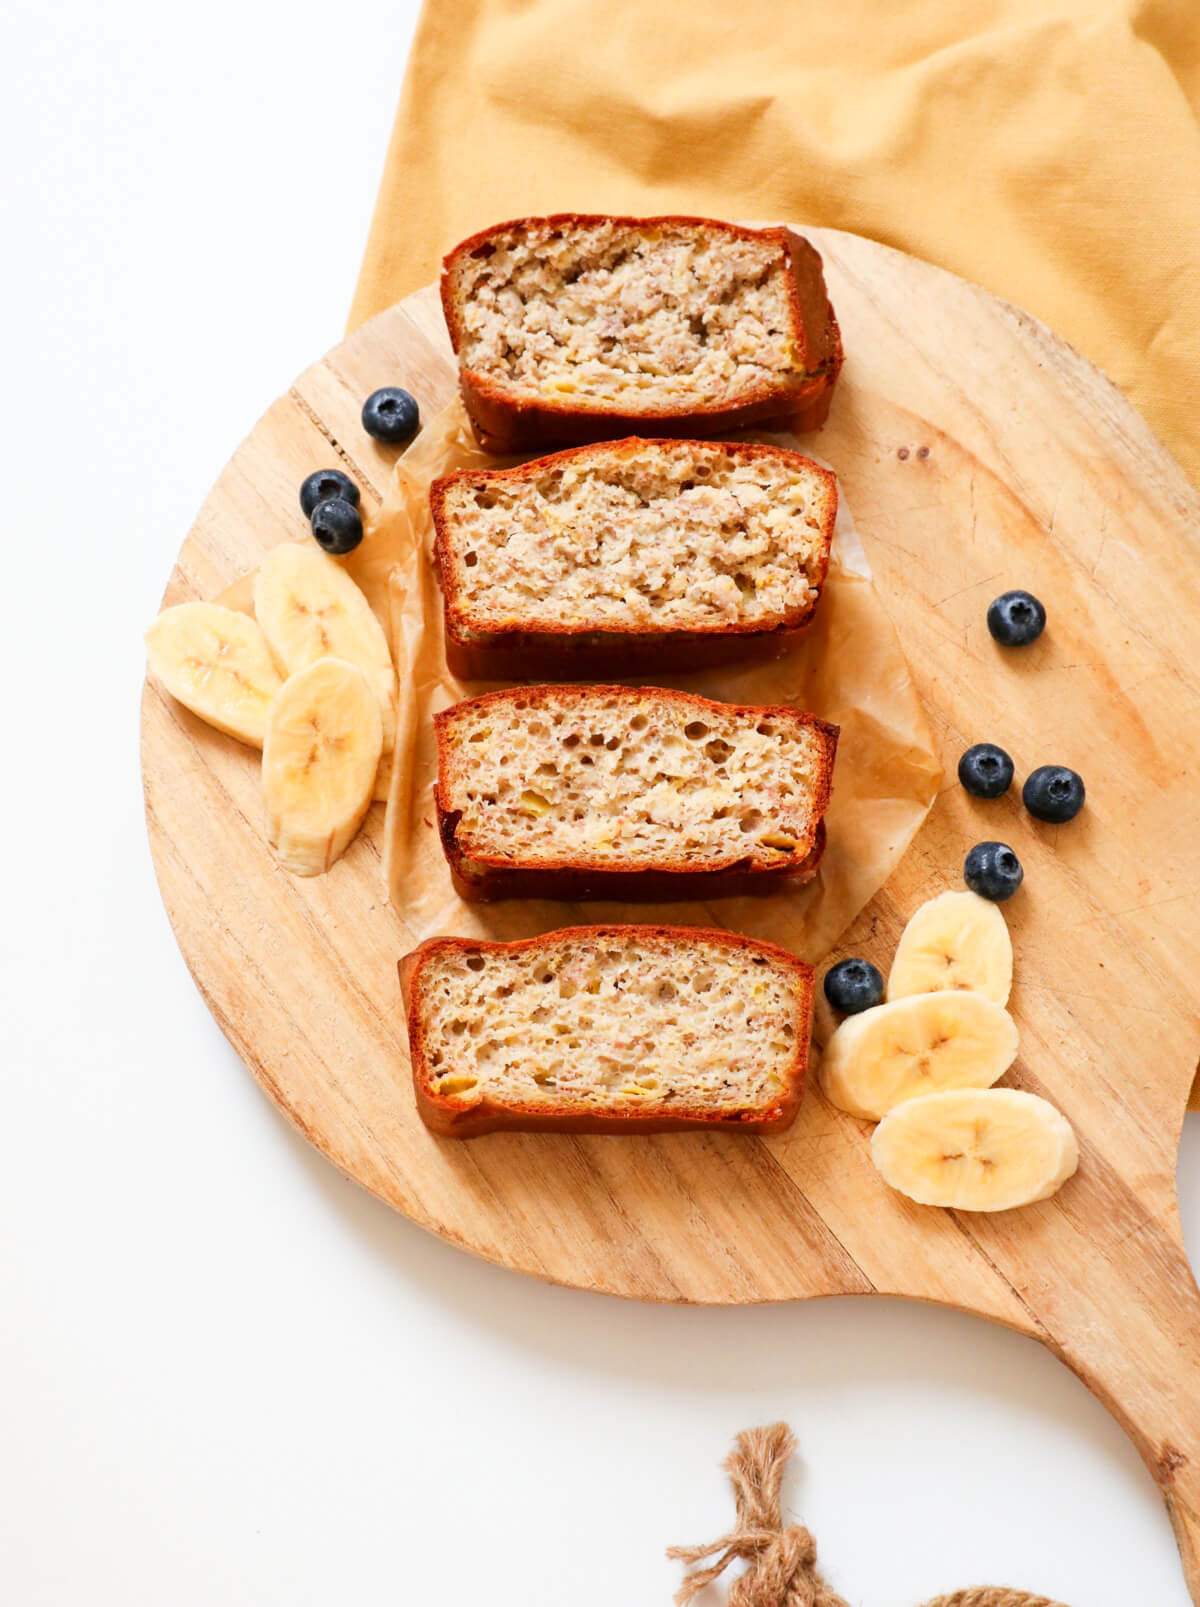 4 slices of sugar free banana bread on a wooden board with banana slices and blueberries on the side. 